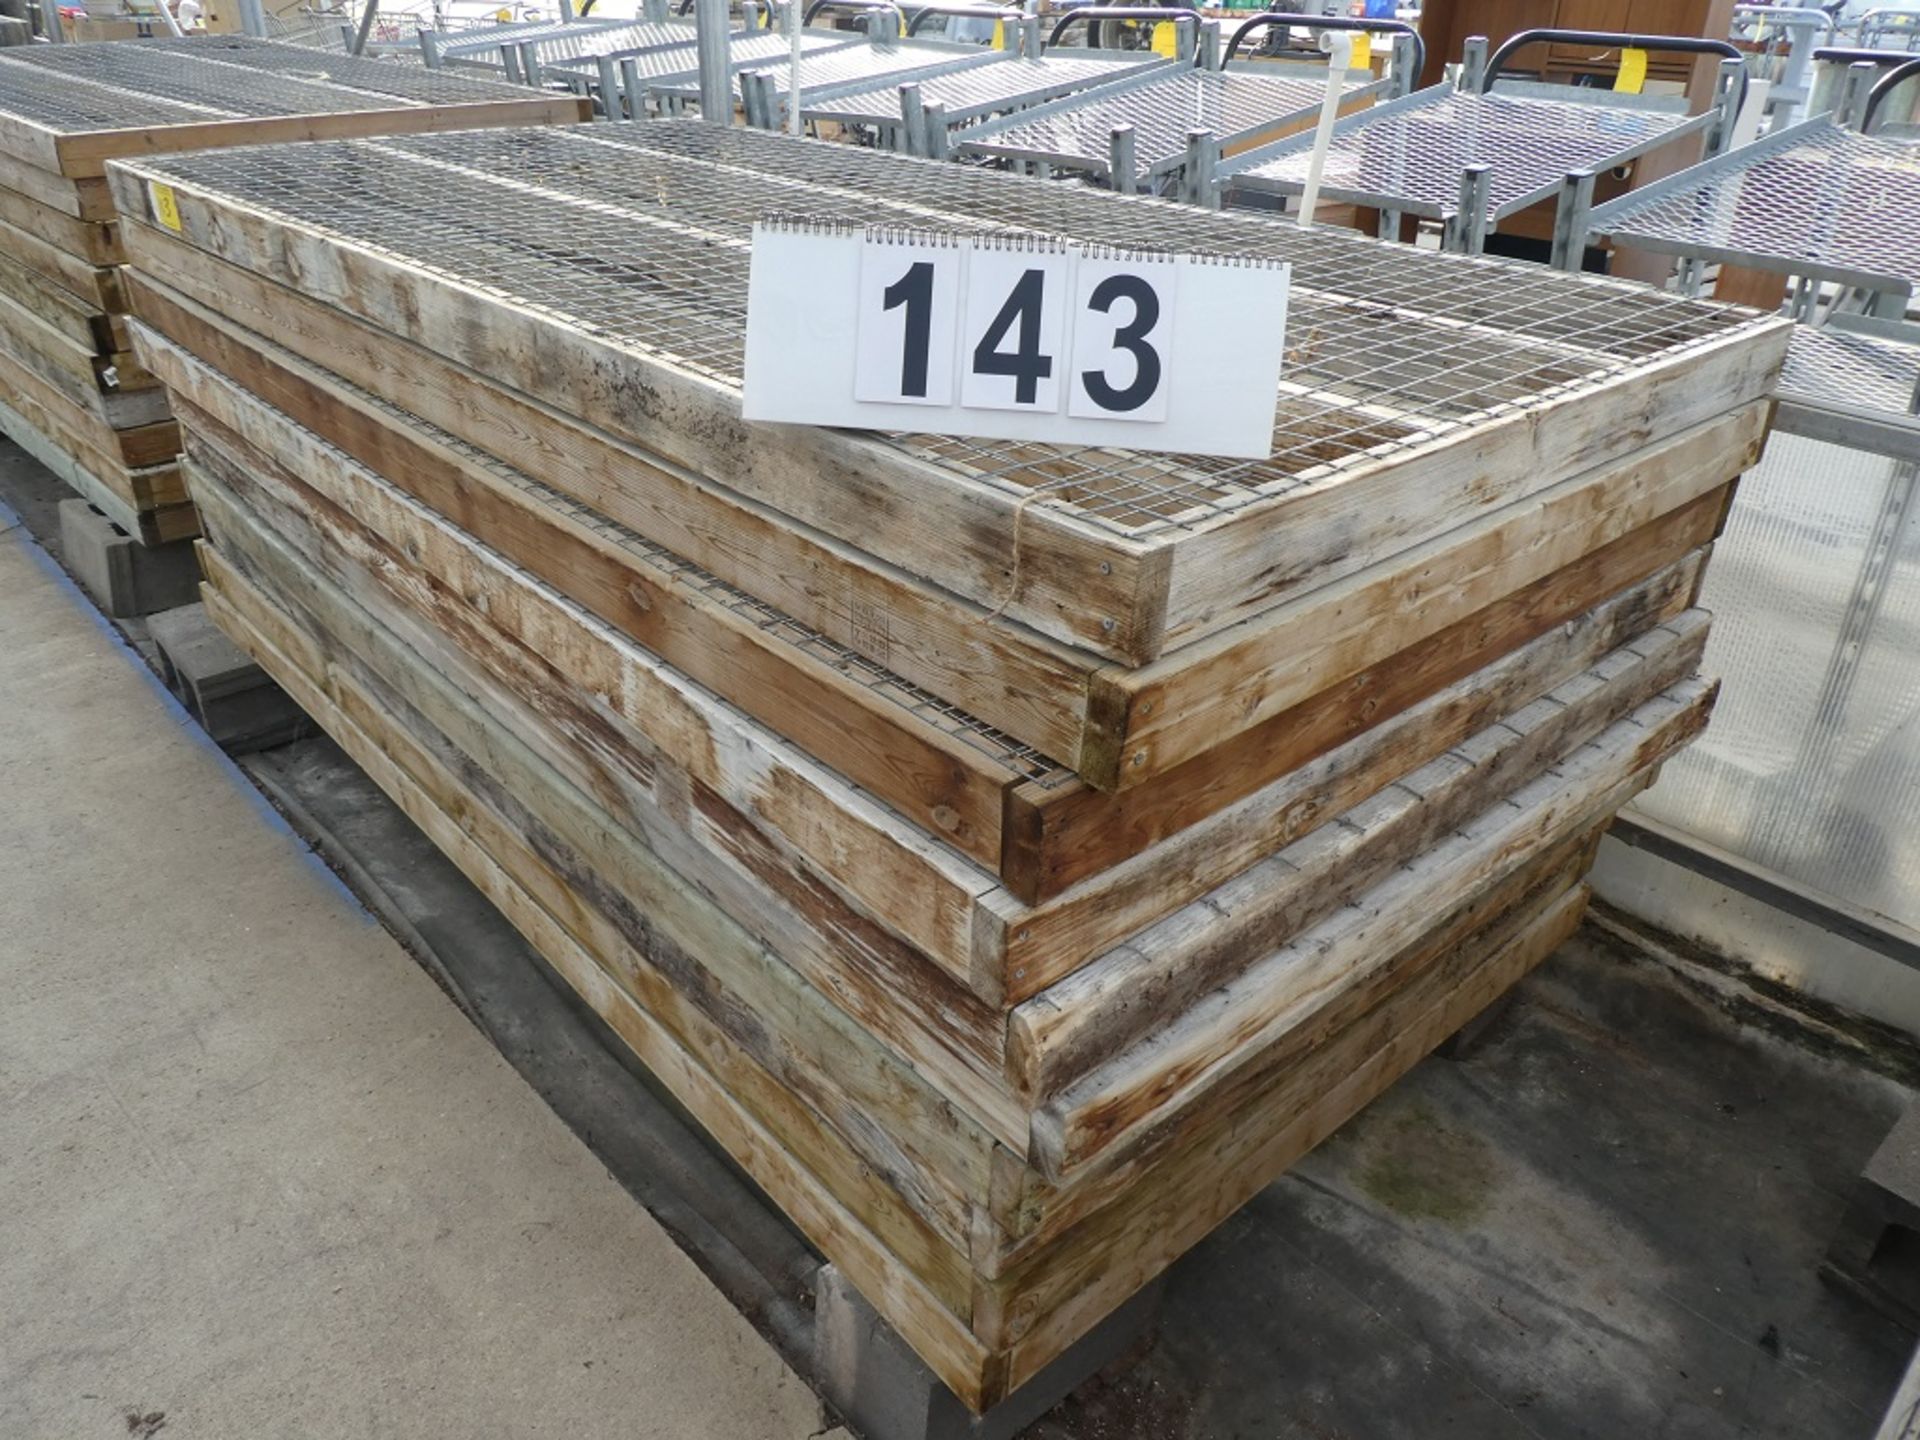 10 - 4'X8' WOOD FRAME WIRE MESH GROWING TABLE